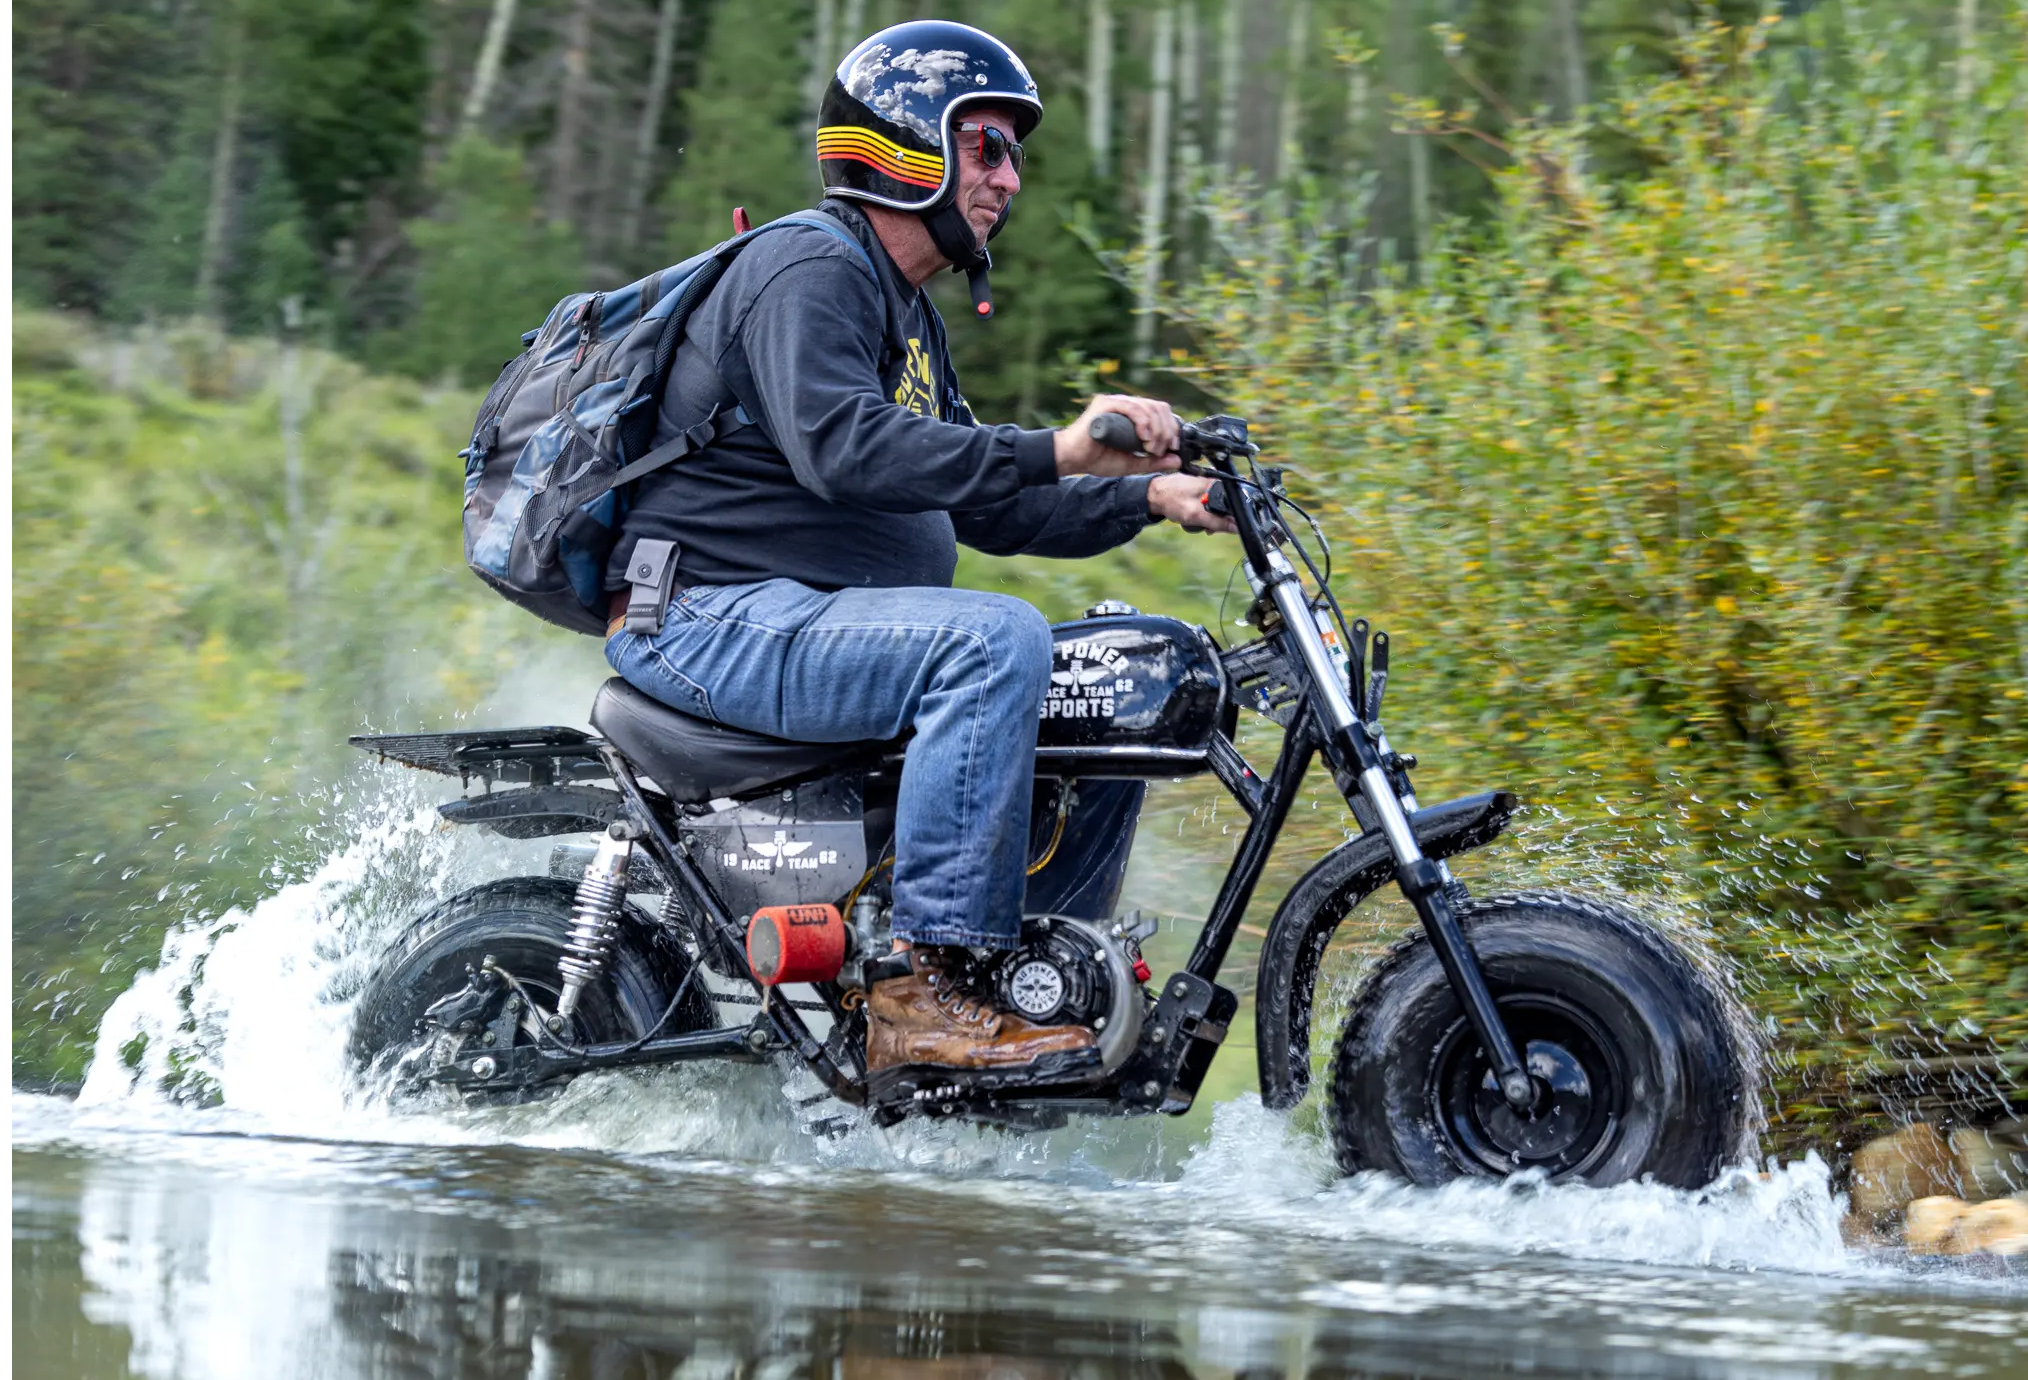 TrailMaster MB200-2 Mini Bike going through the river in the Colorado Rocky Mountains